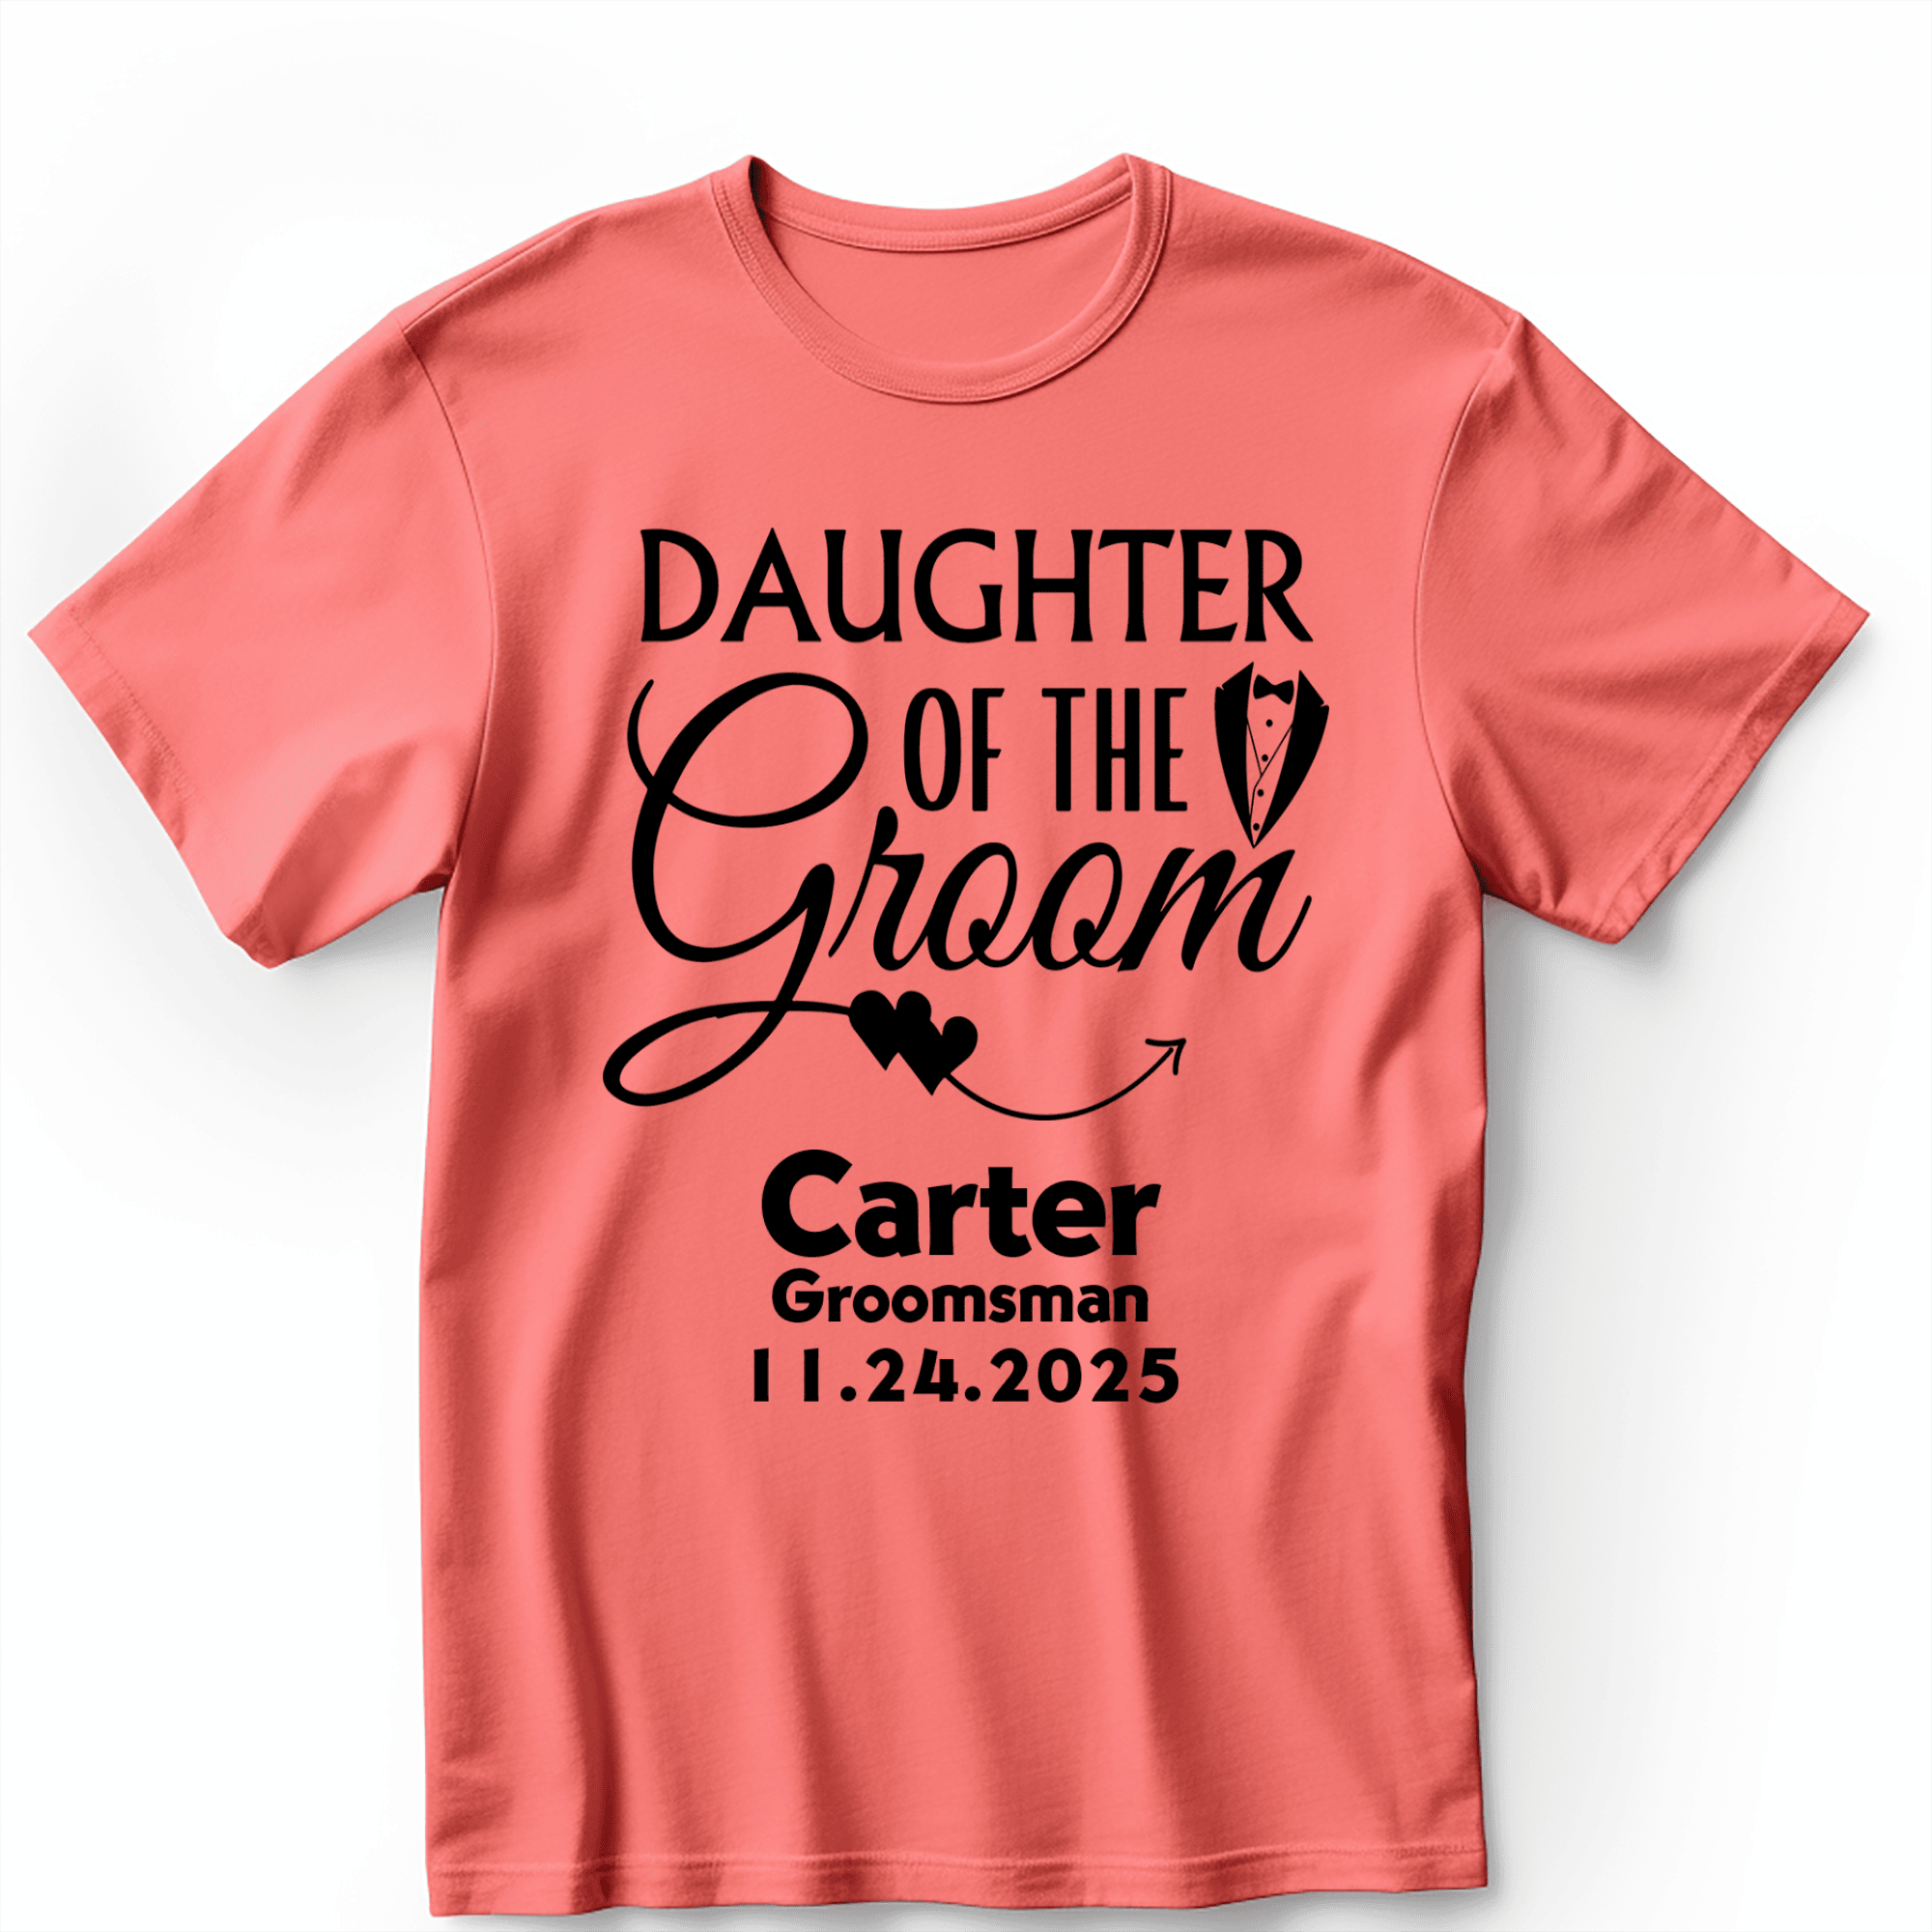 Light Red Mens T-Shirt With Daughter Of The Groom Design